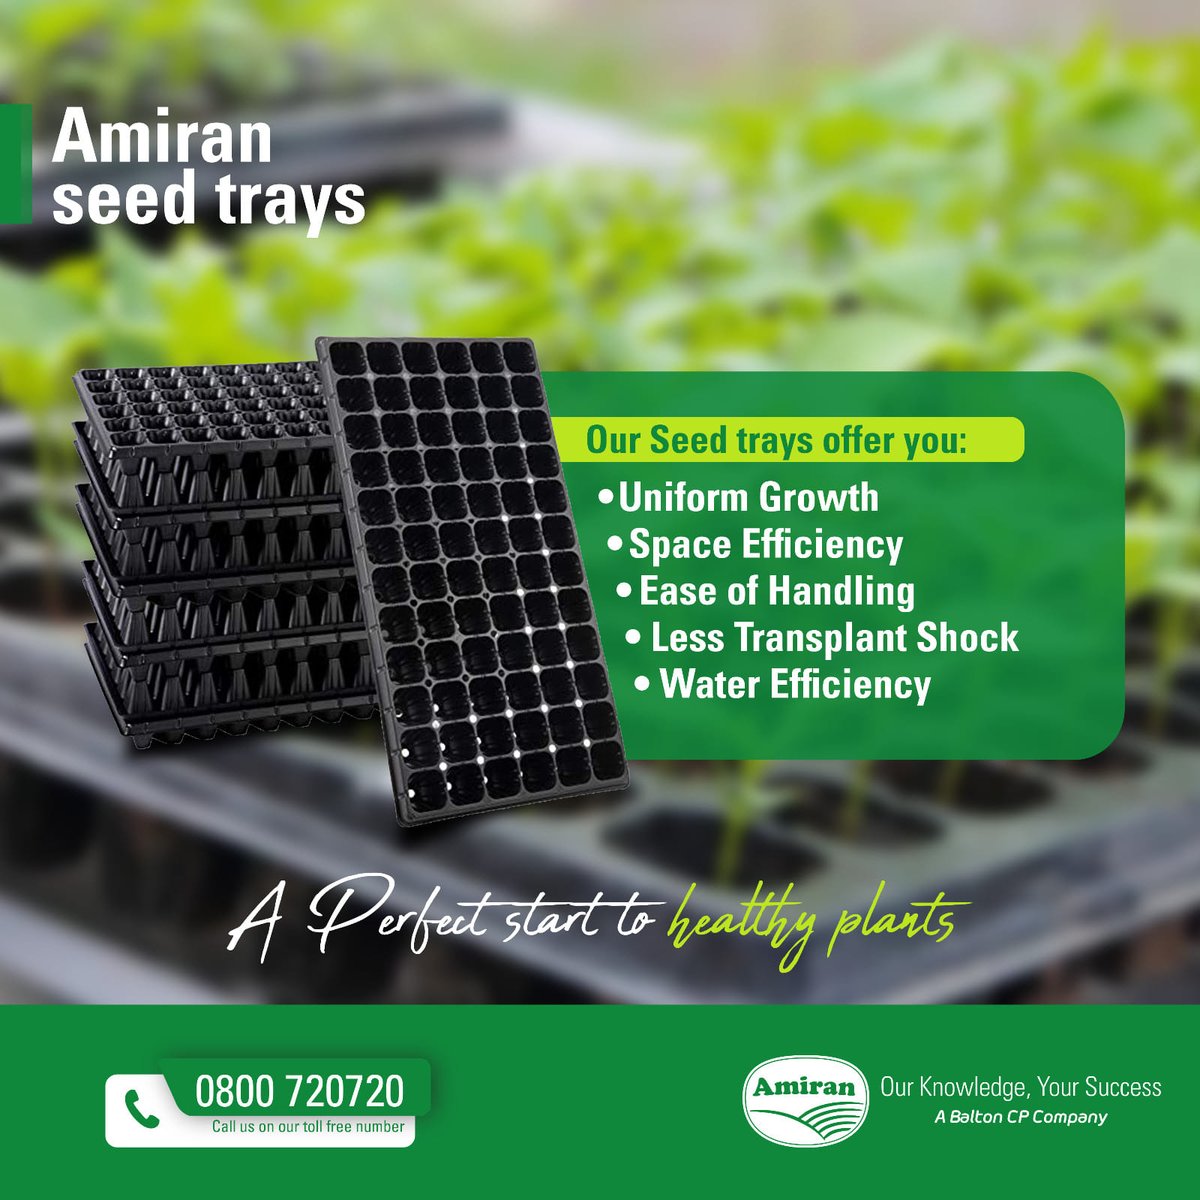 It's the planting season ,taking care of your nursery is crucial for healthy plants, and using seed trays is a key step in the process! For more information on trays for healthy seedlings, call 0800720720. #OurKnowledgeYourSuccess #amiran #farming